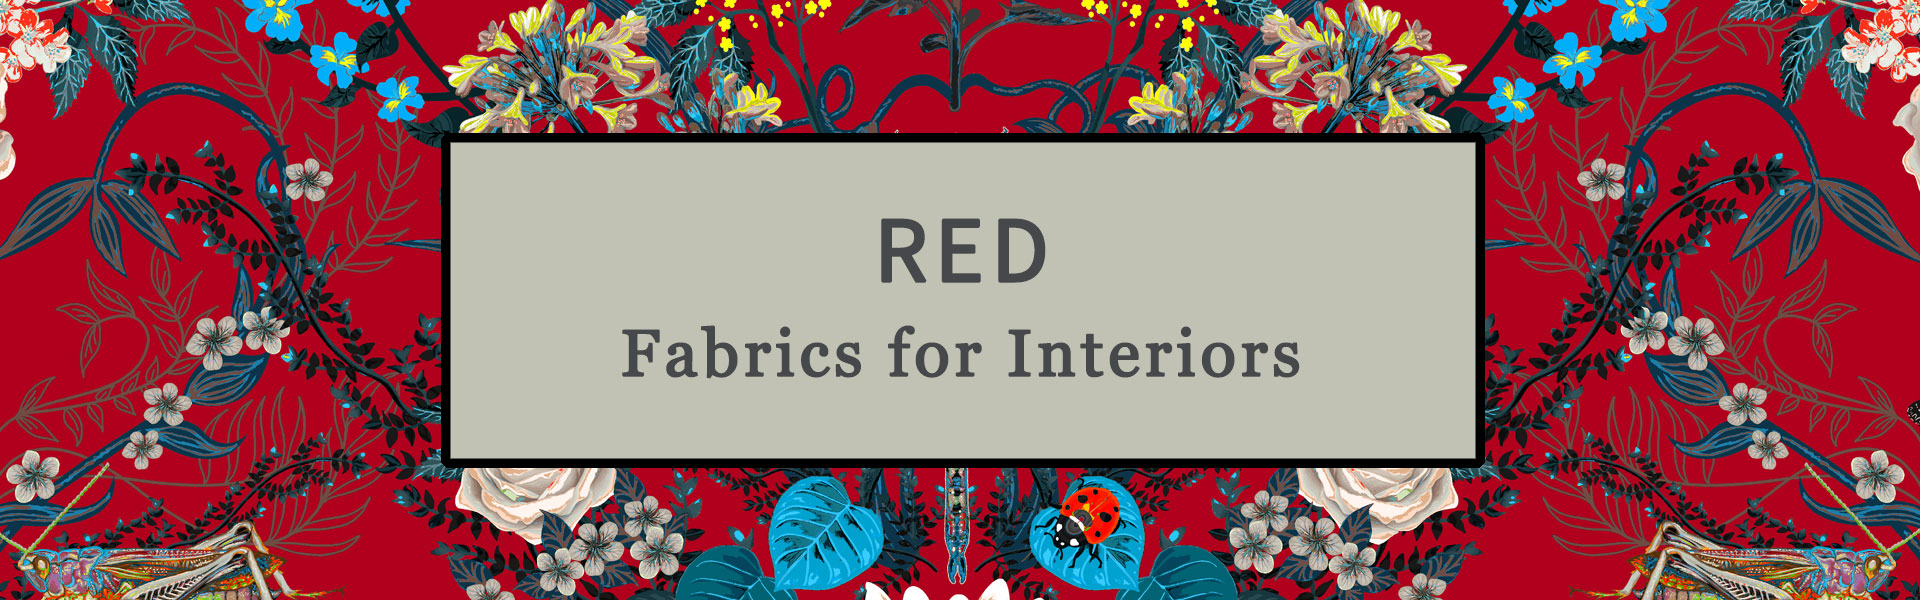 Red Fabric for Interiors, Upholstery, Curtains and Soft Furnishings by Designer, Becca Who